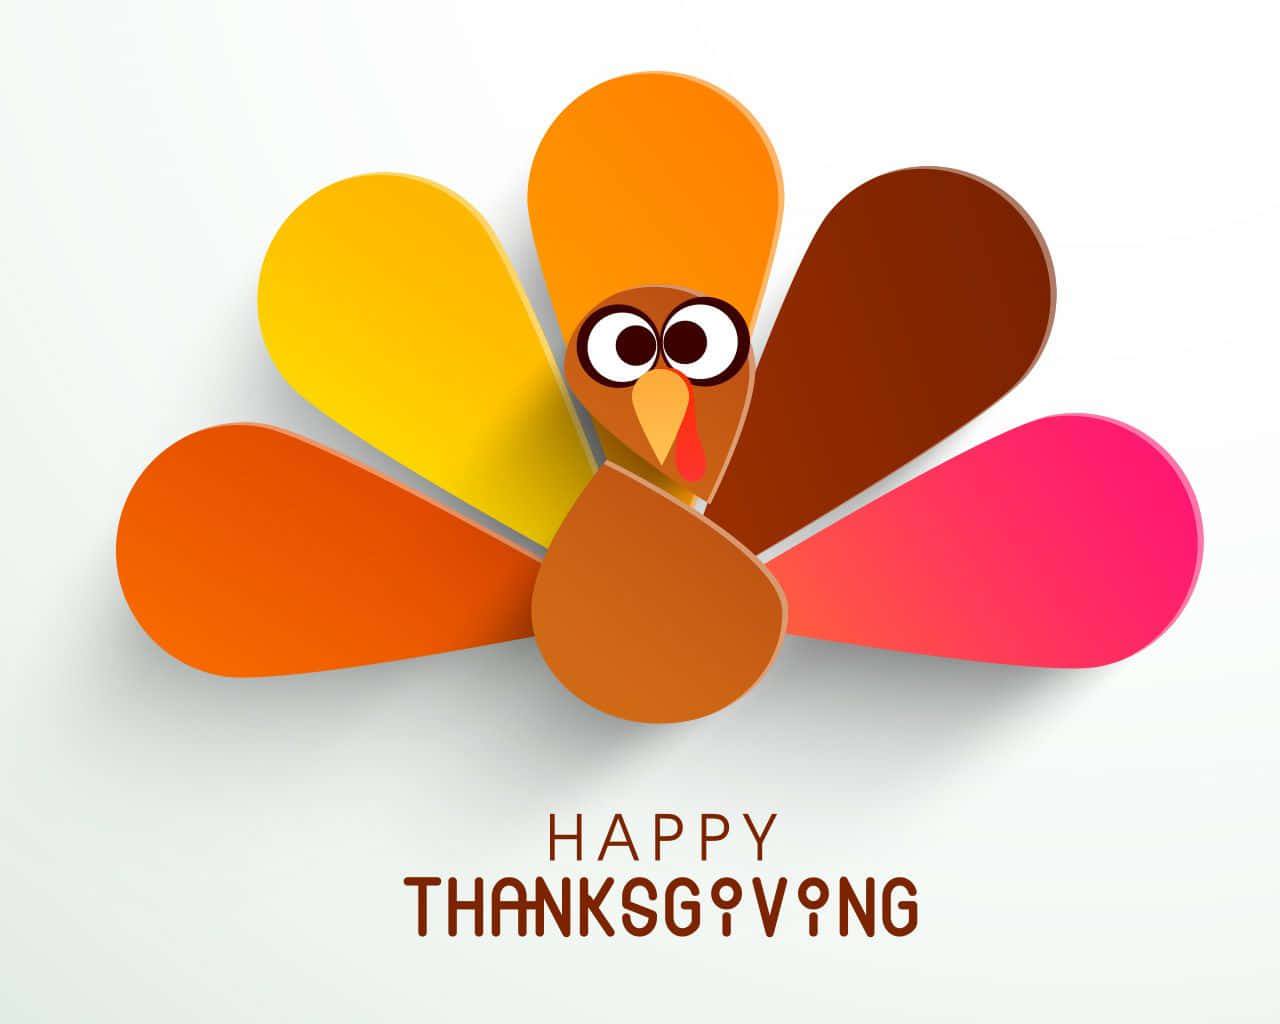 Wishing you and your family a very Happy Thanksgiving! Wallpaper